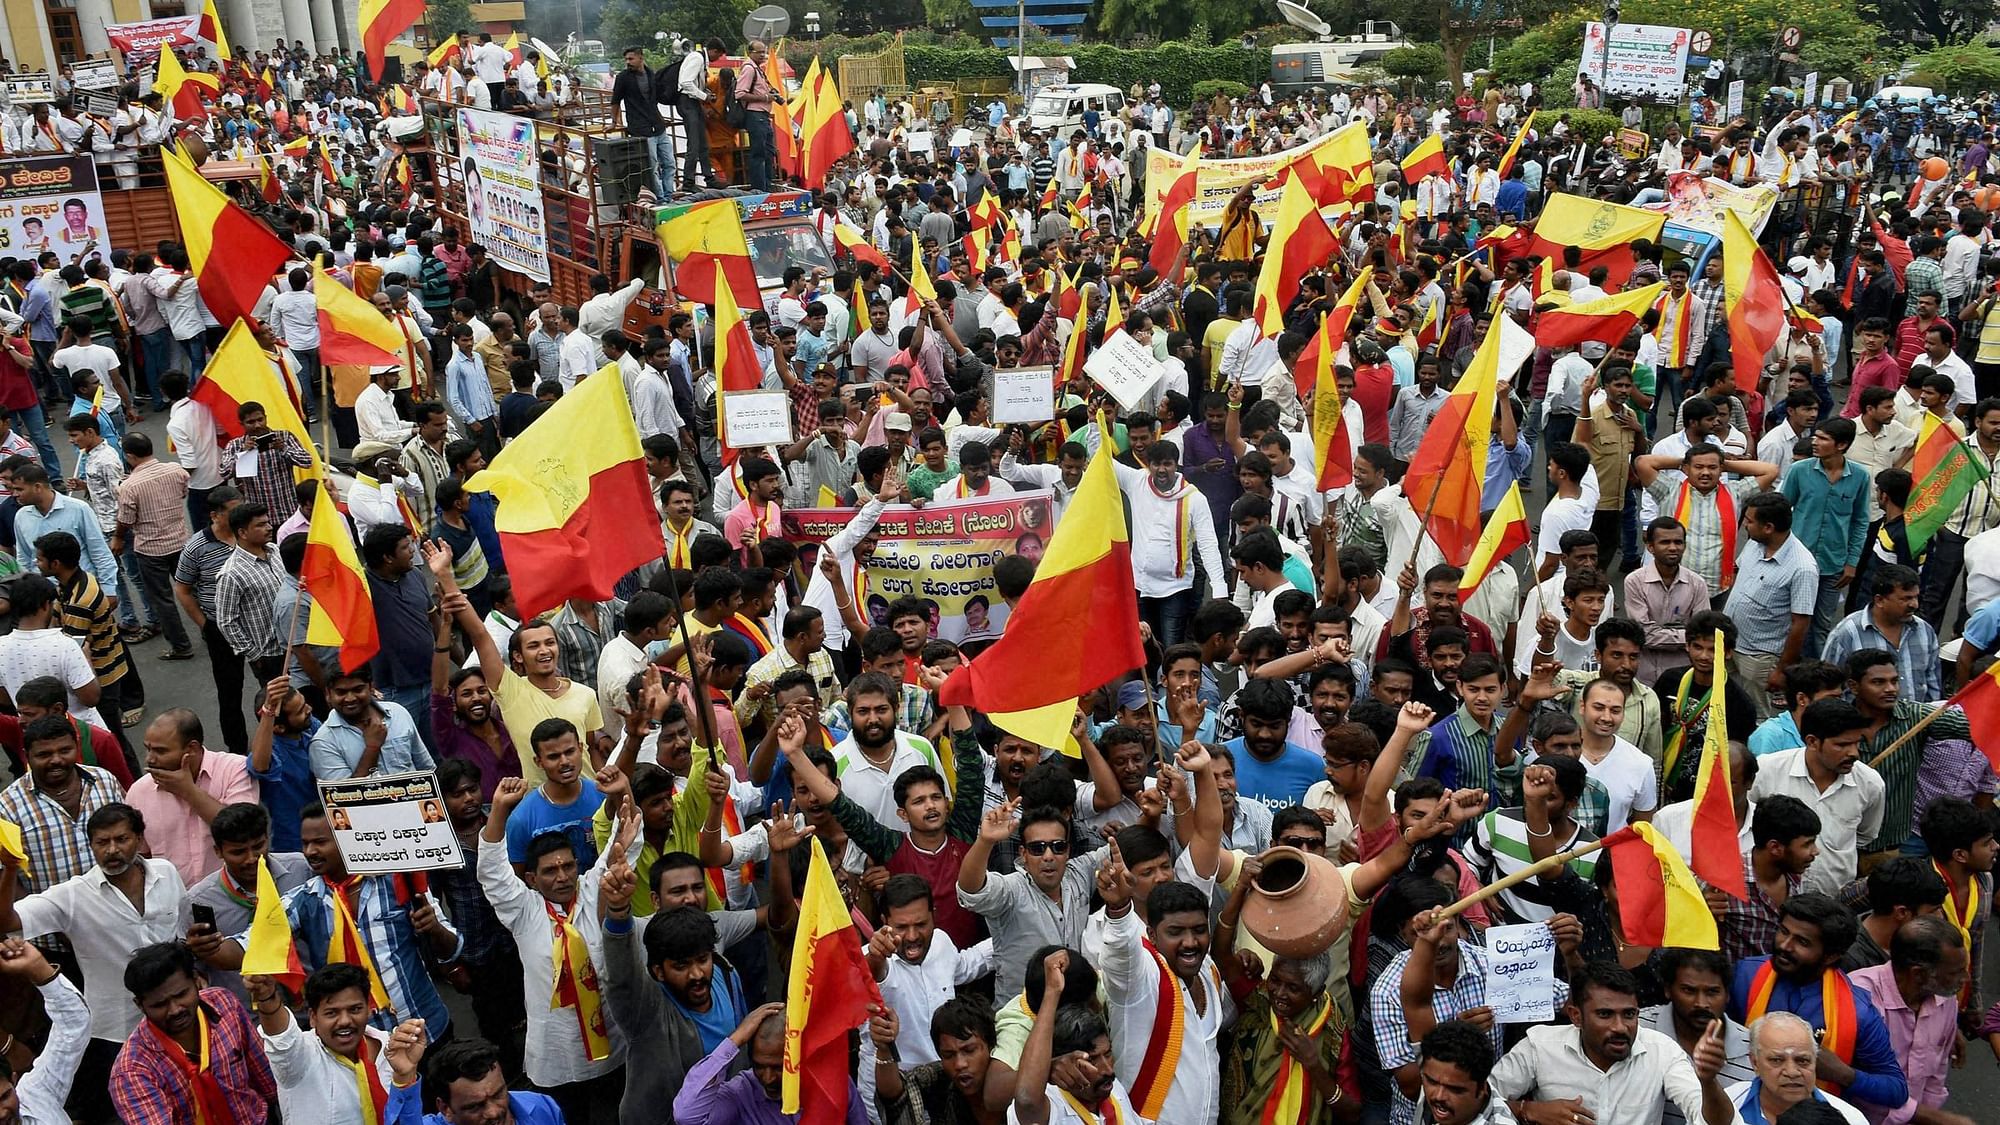 As the law and order situation deteriorated, Kannada news channels vied to outdo each other and be provocative. (Photo: PTI)